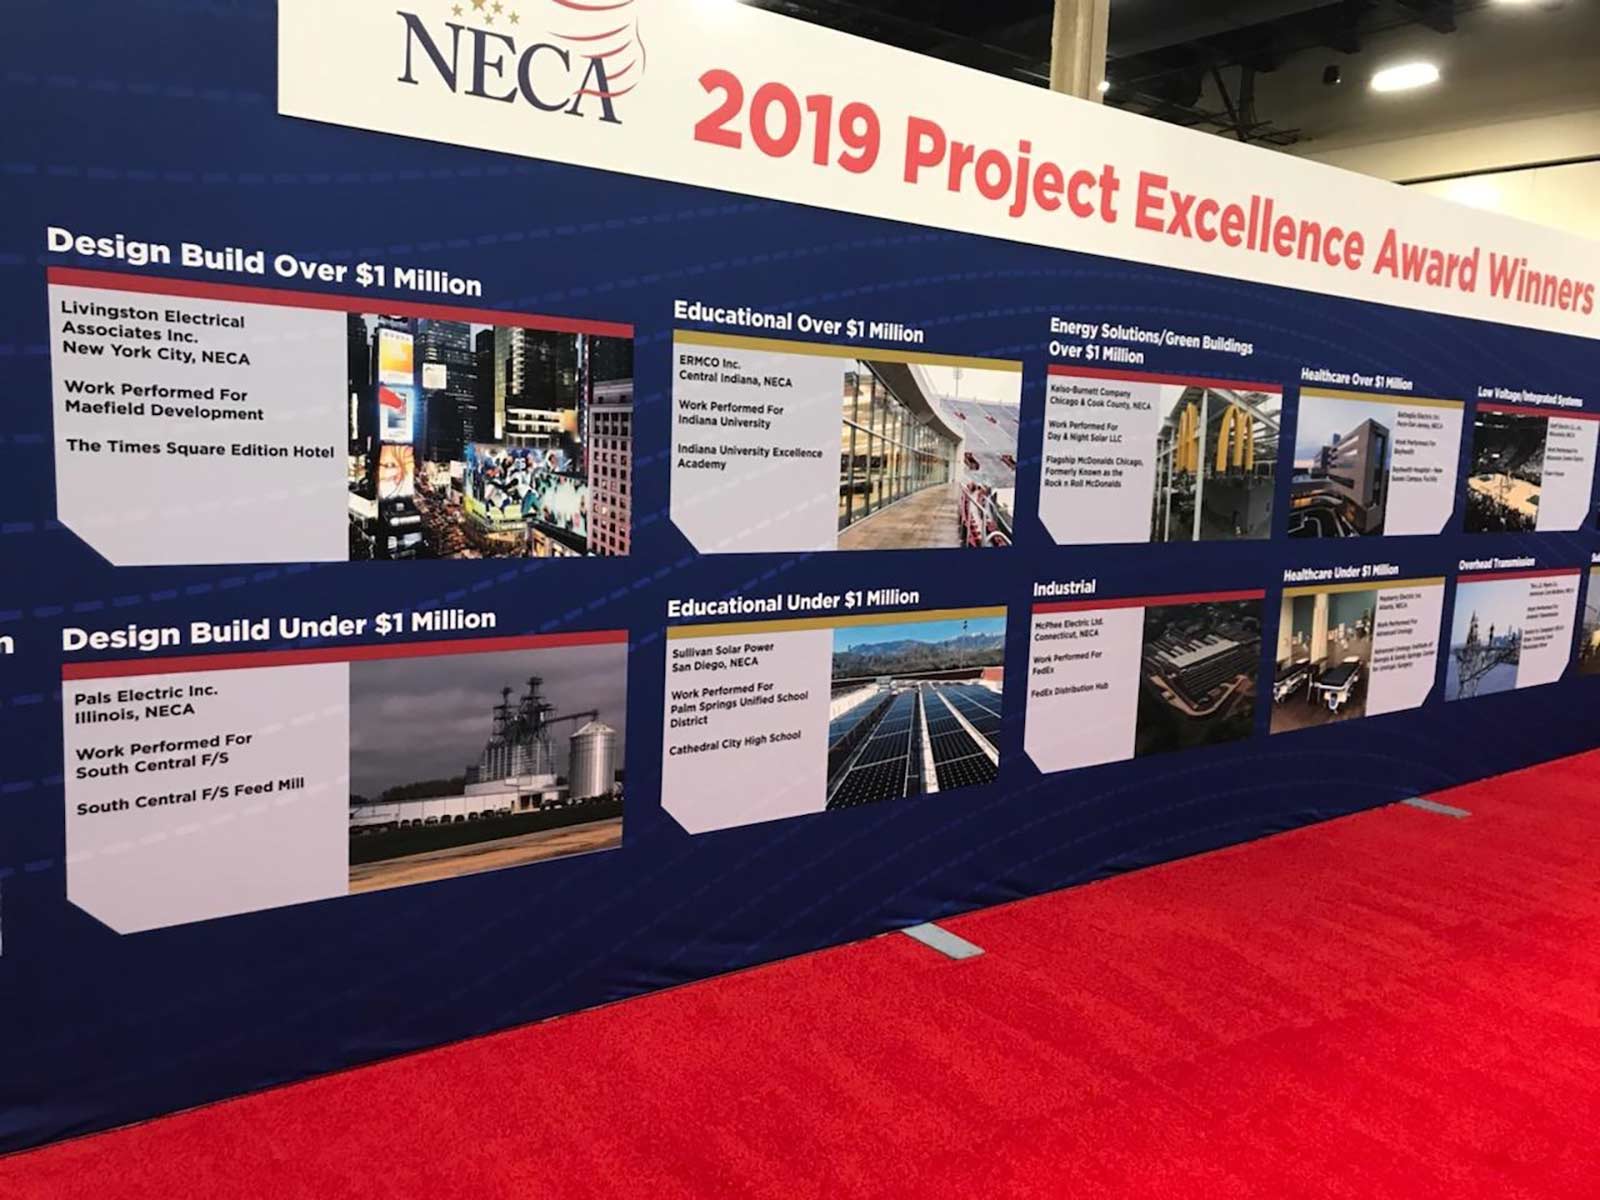 a N E C A Project Excellence wall banner showing Pals Electric winning for a Design Build Under $1 million